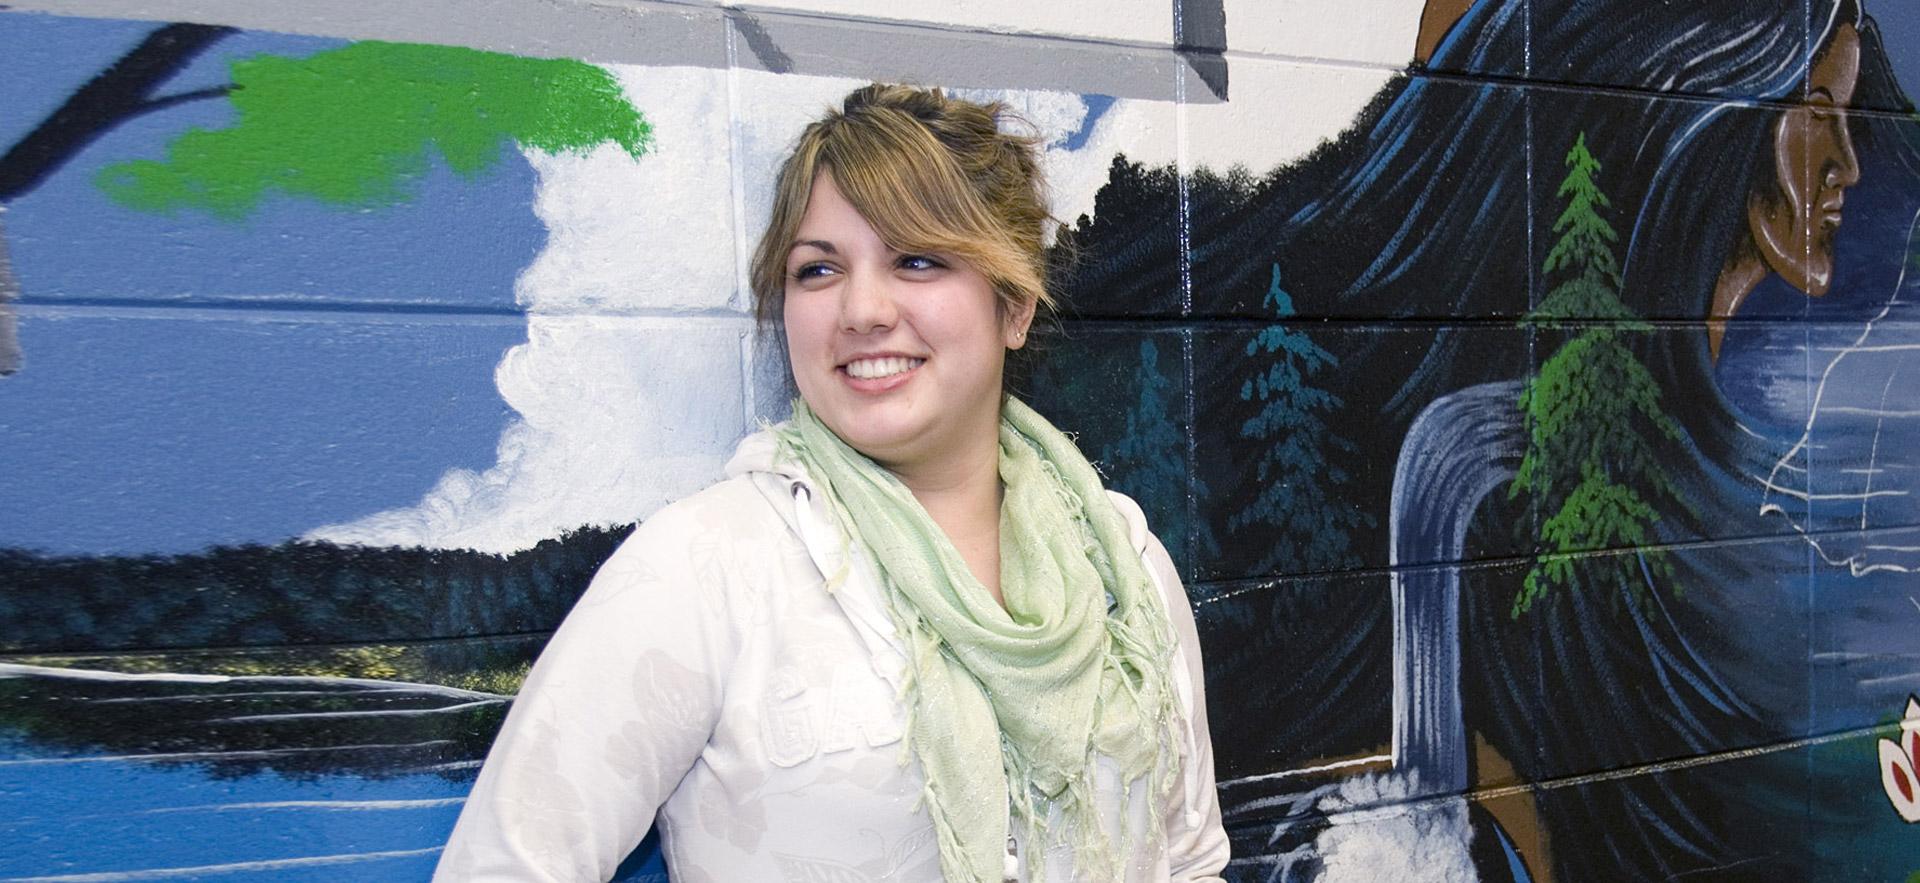 Female indigenous studies student smiling in front of mural.